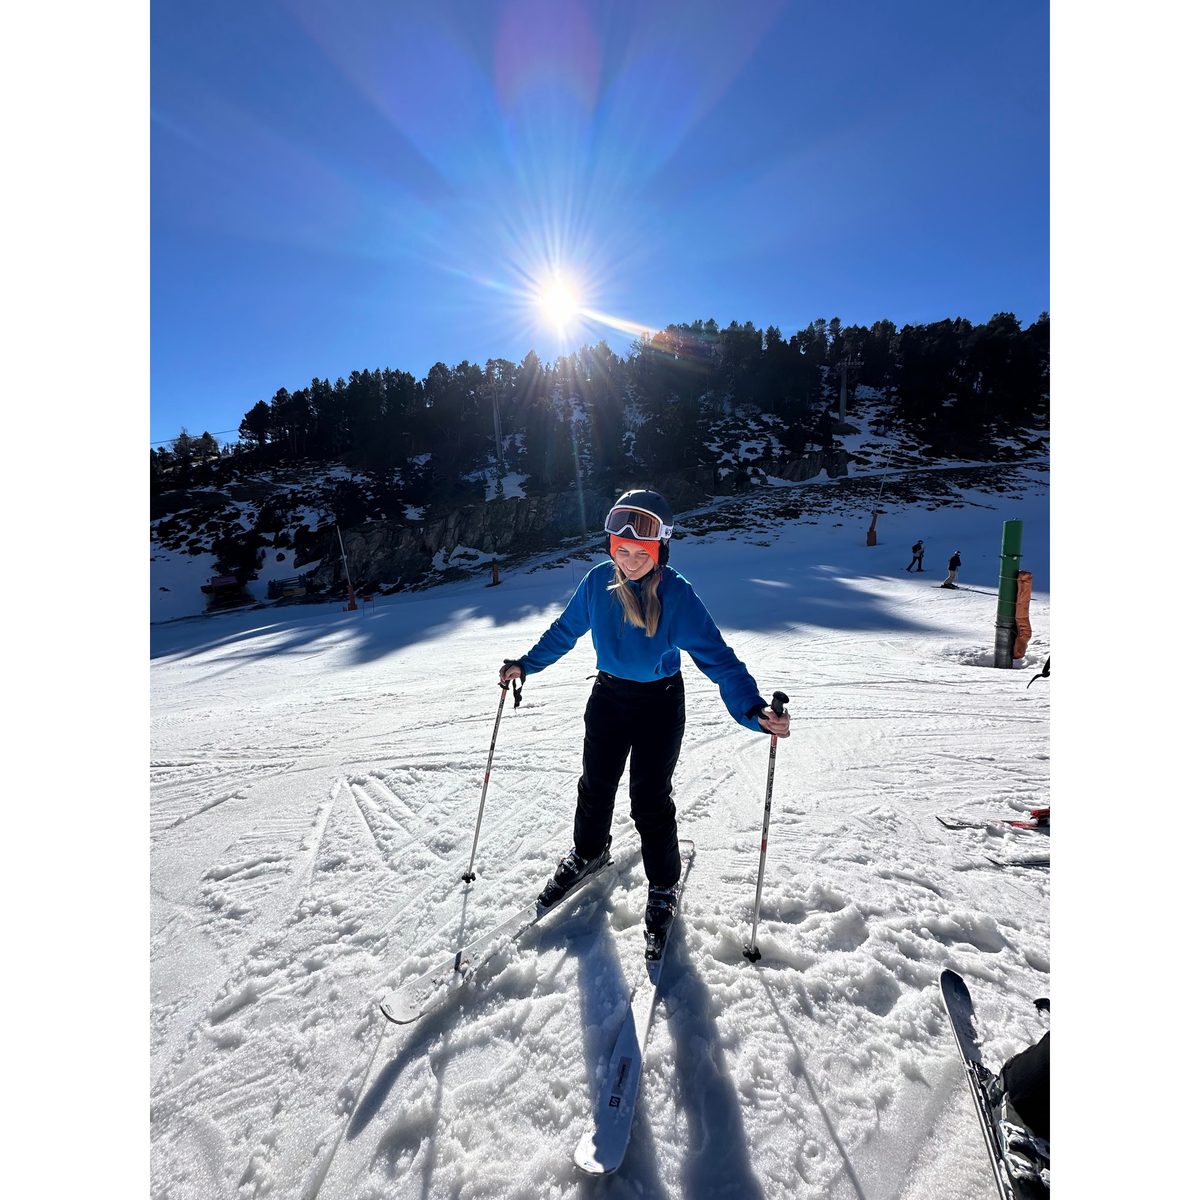 Standing still on skis – sometimes the hardest part (Supplied)